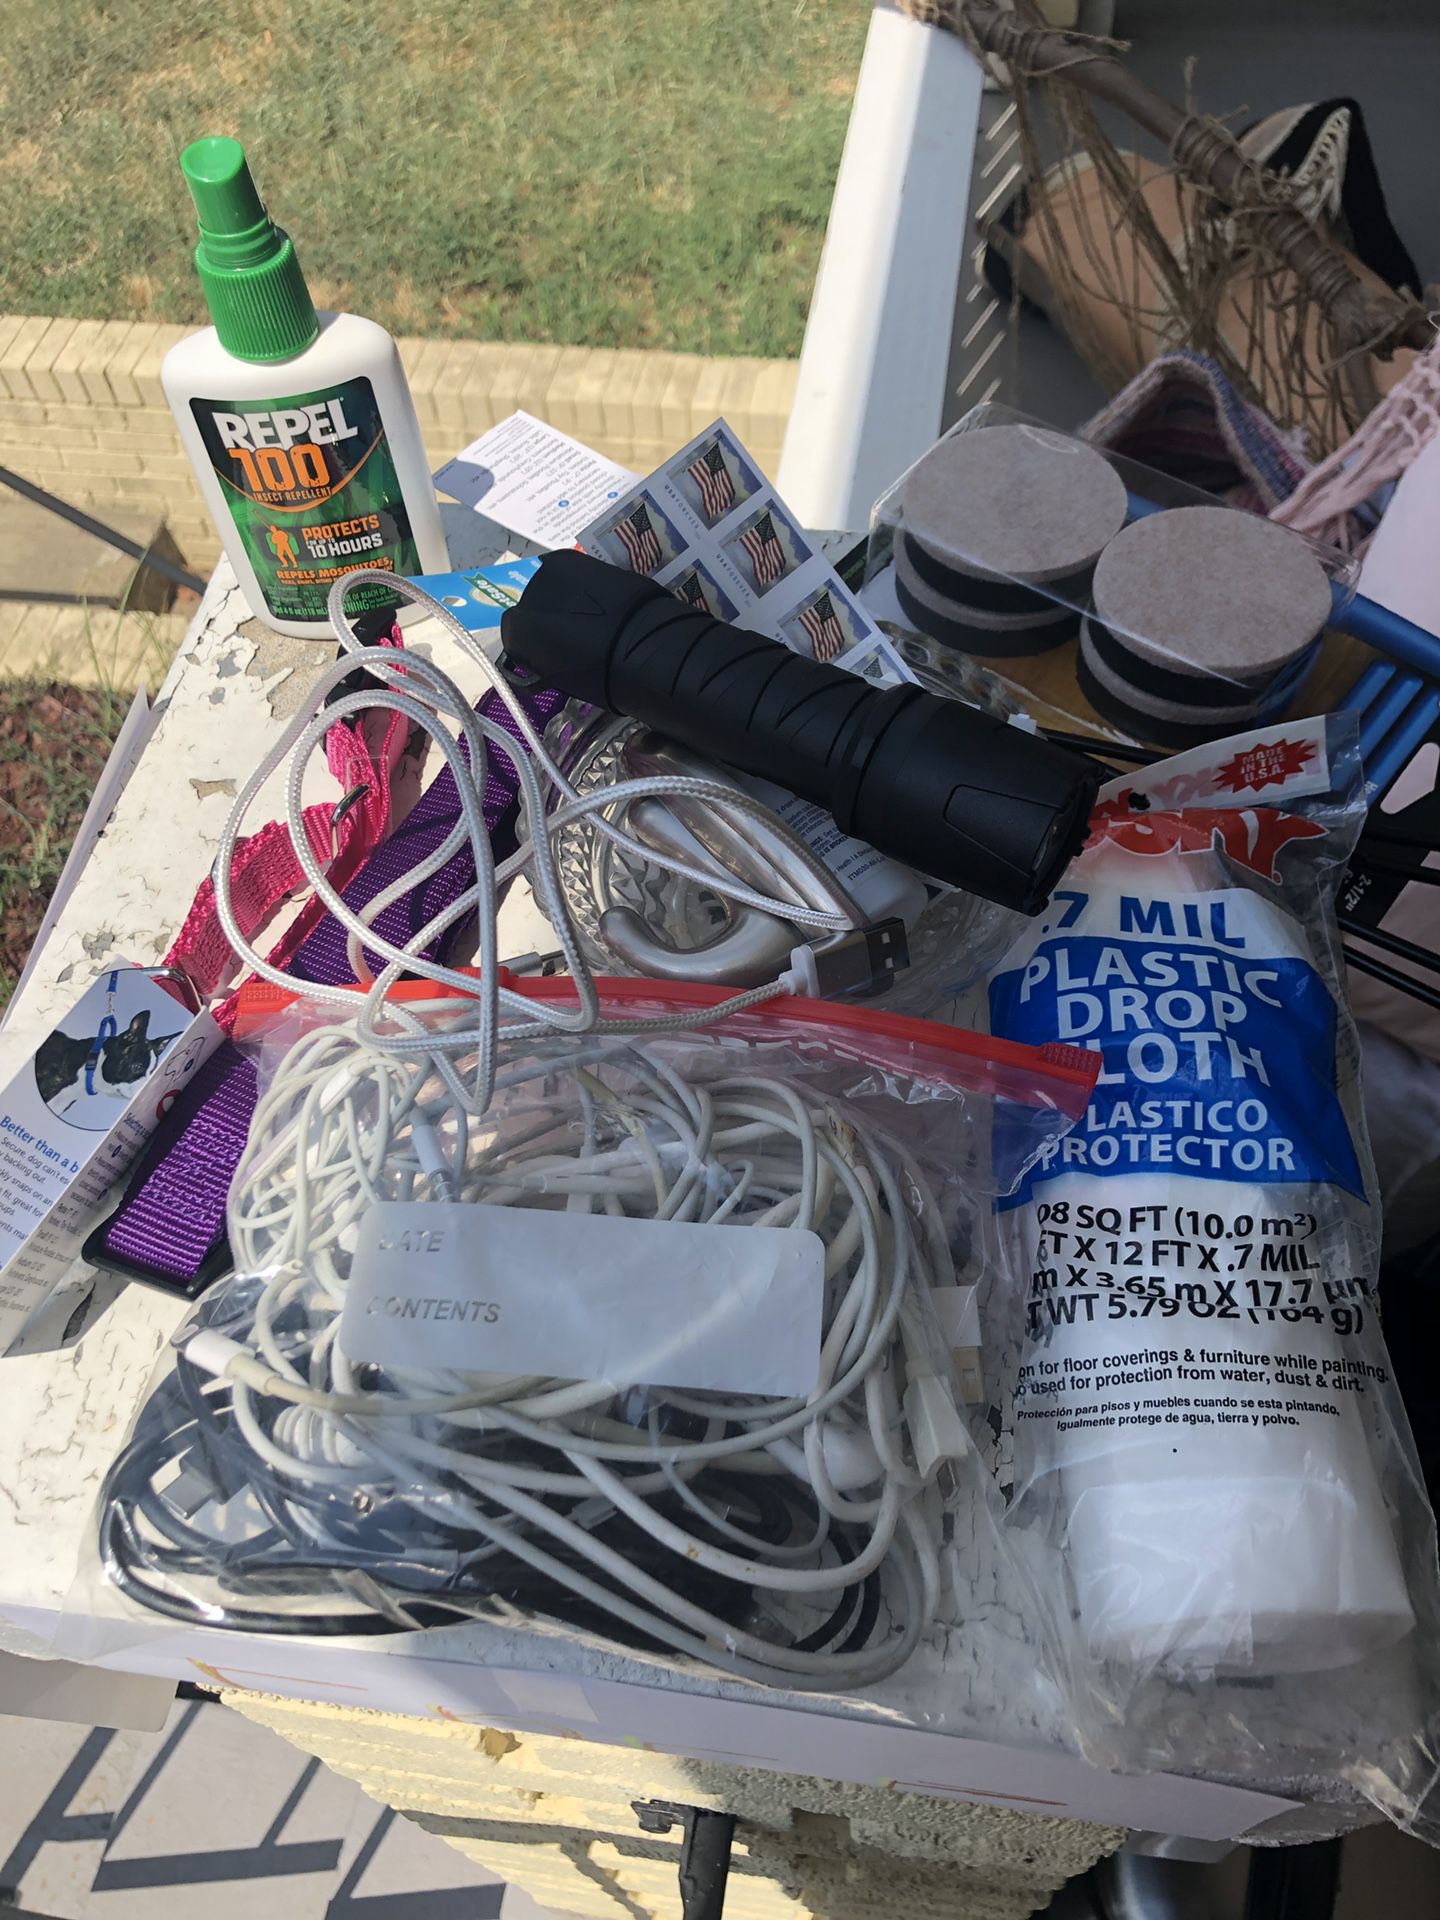 Free miscellaneous household items